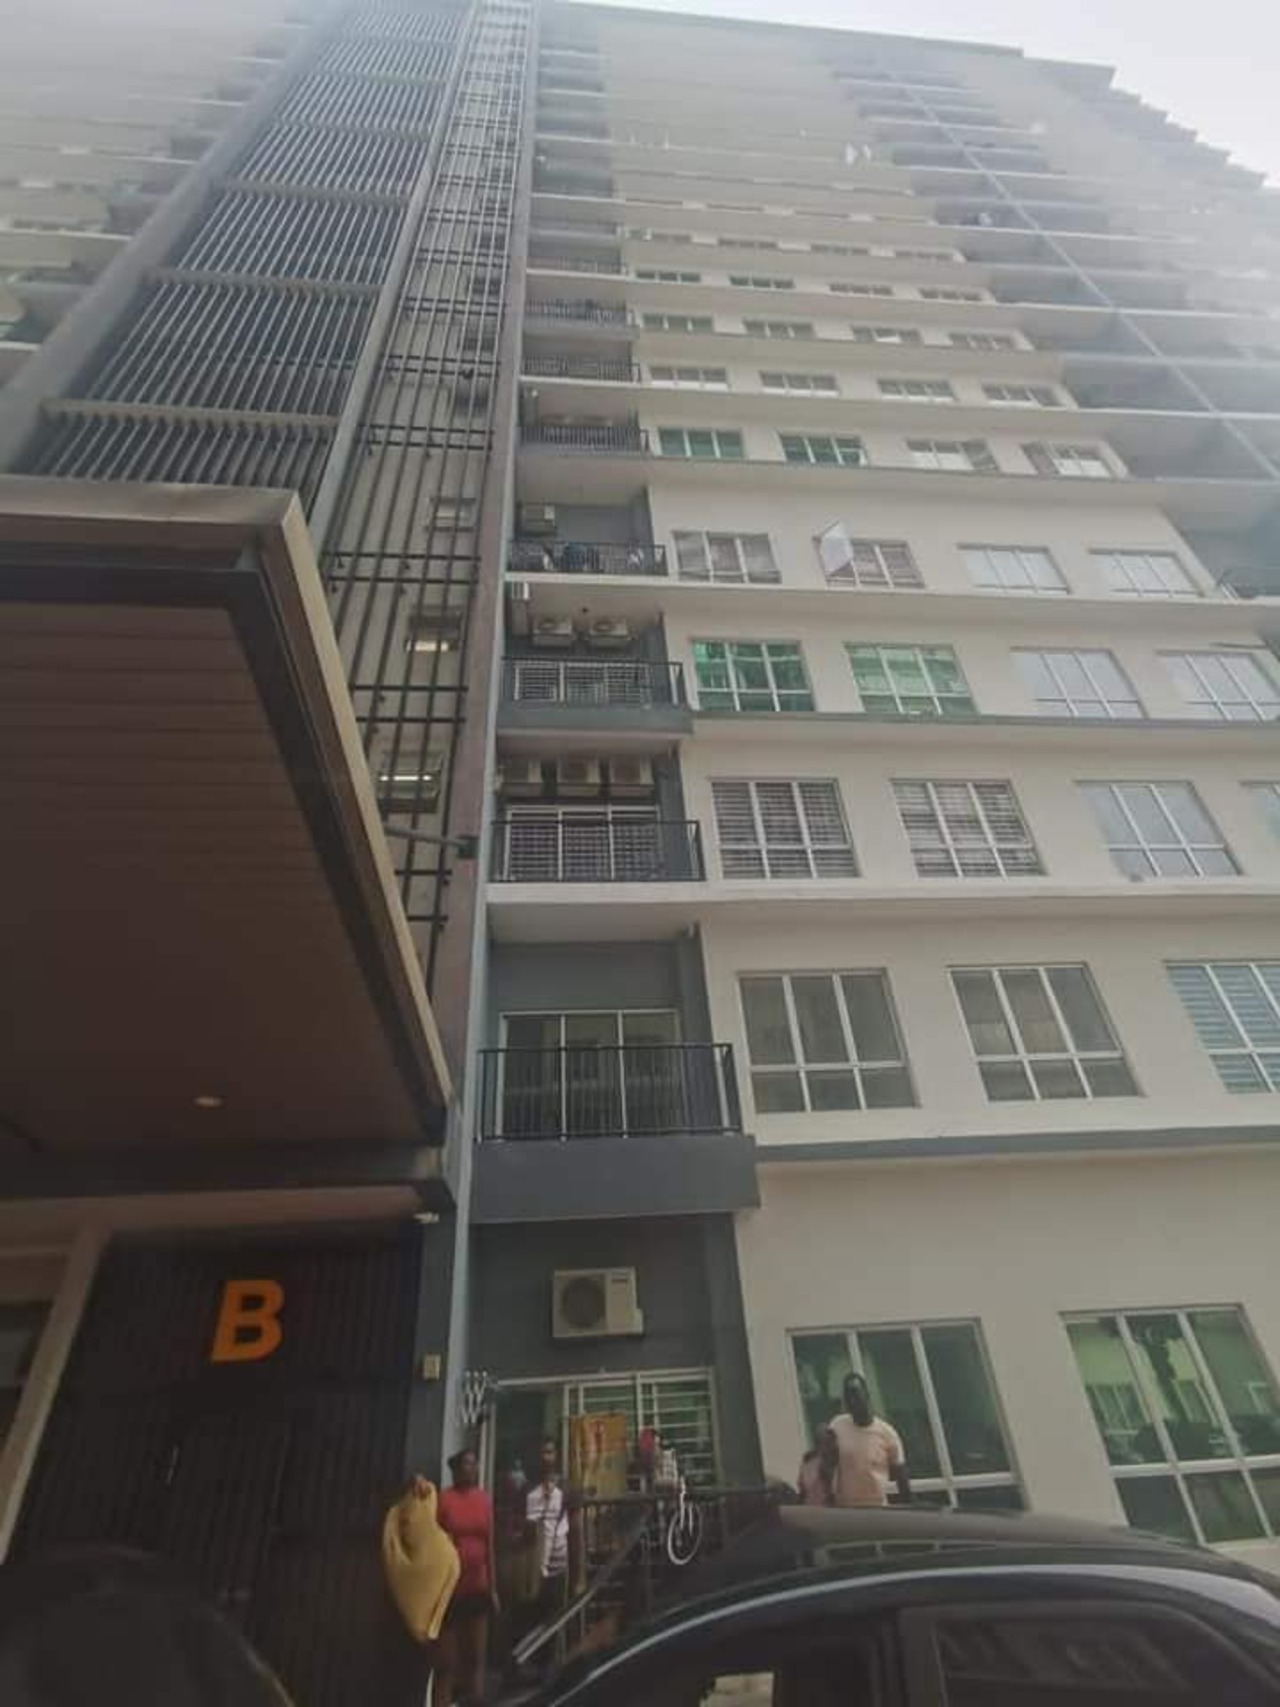 Horror As Zimbabwean Student In Malaysia Jumps To His Death From Tall Building